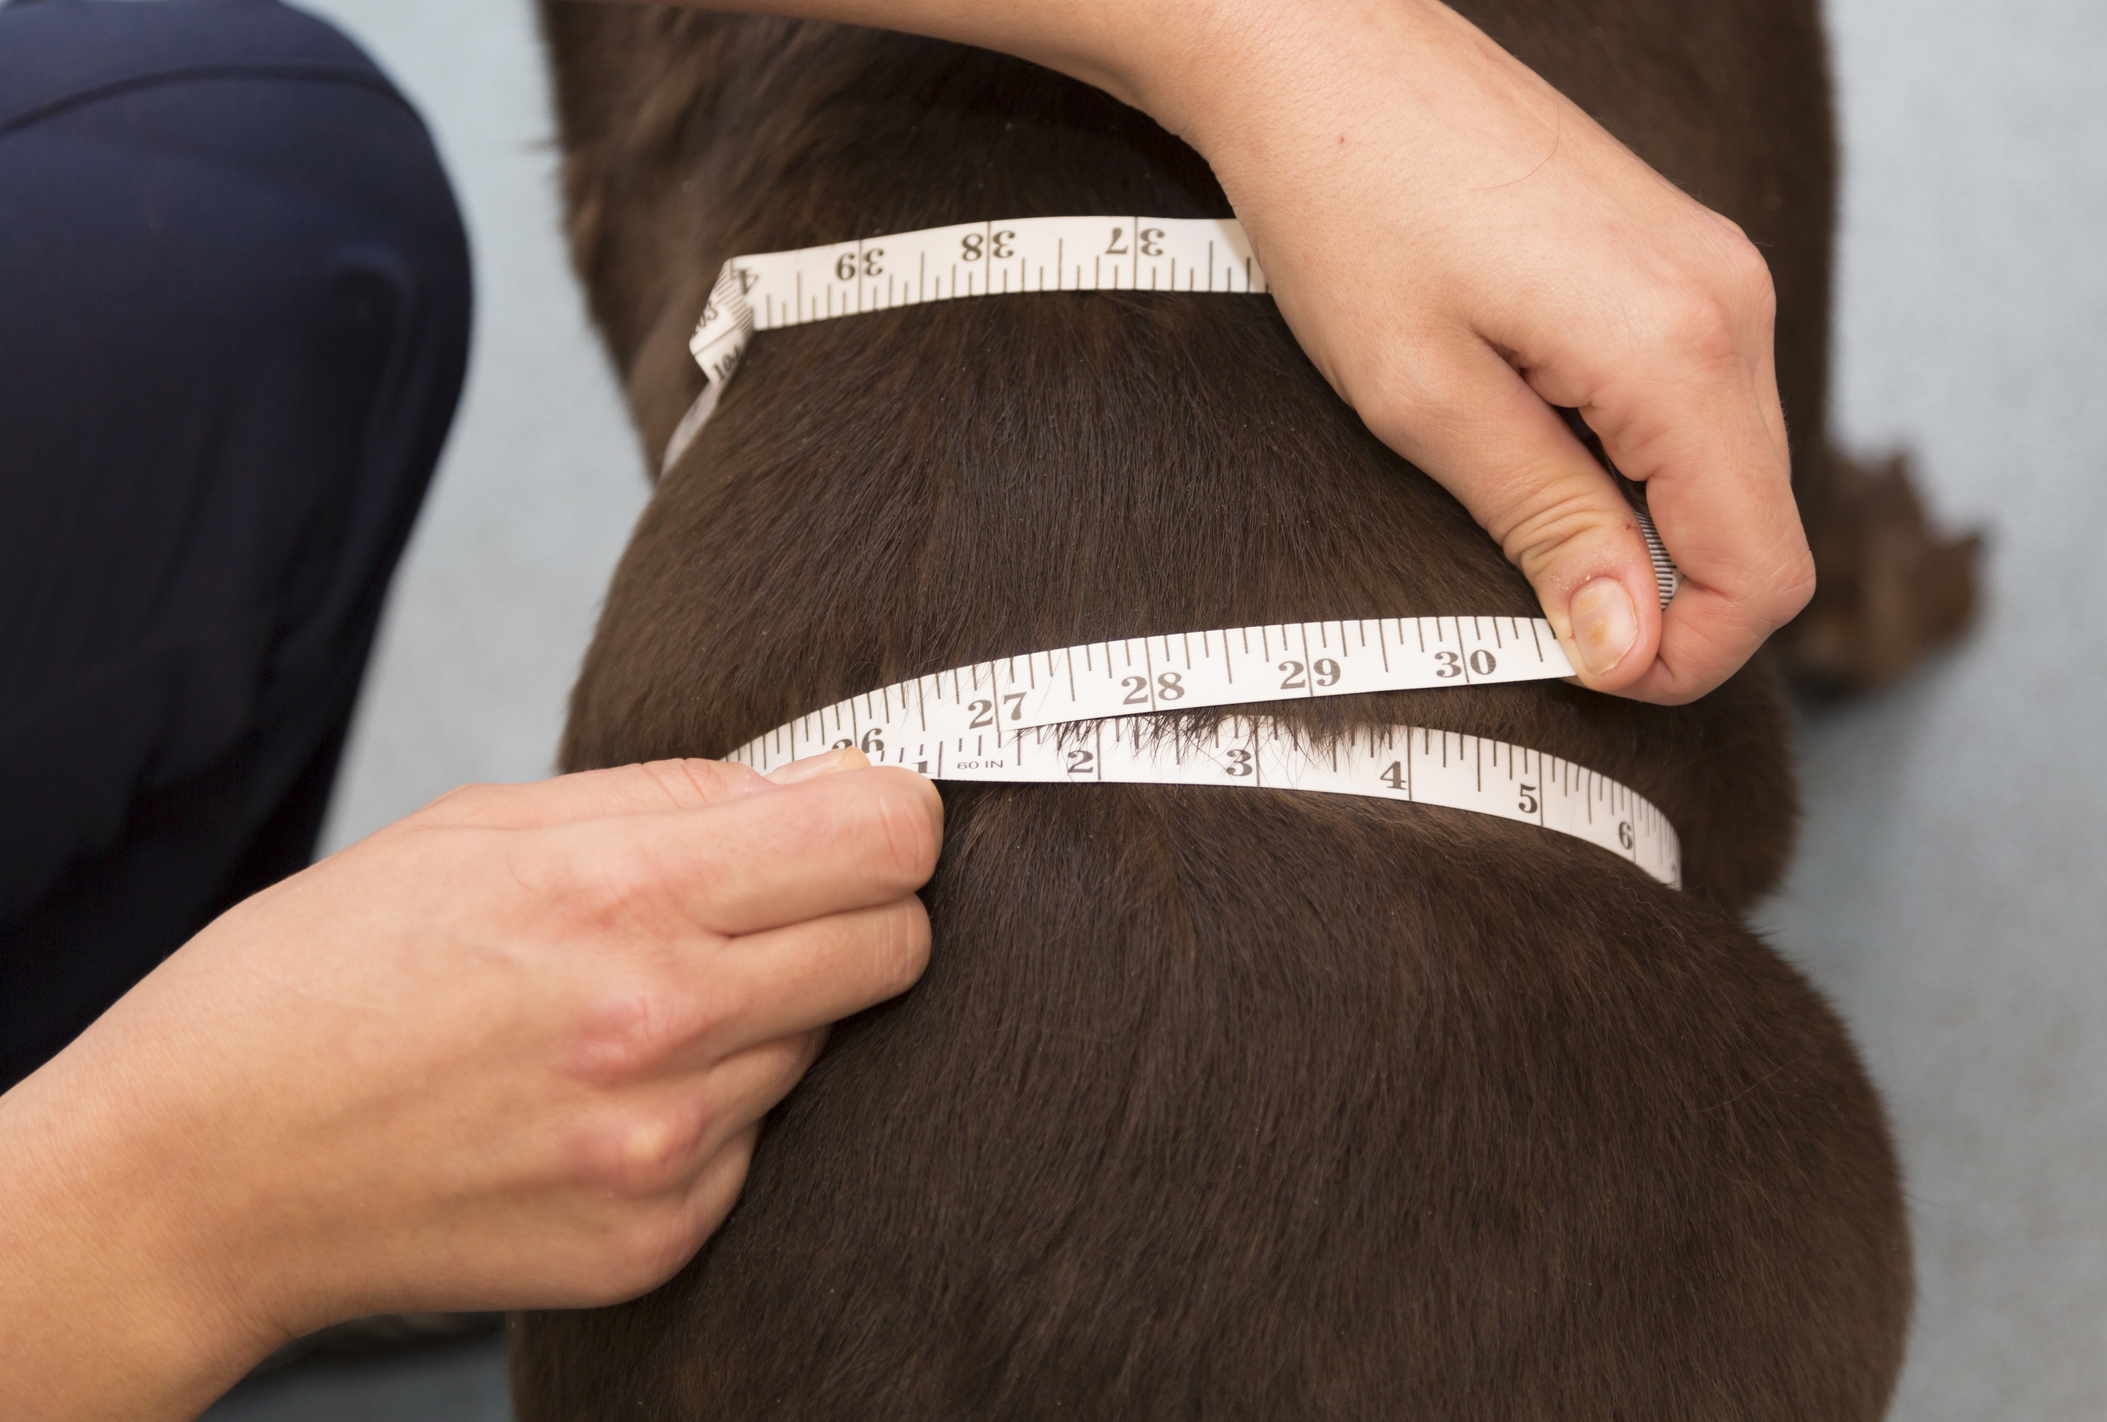 An obese brown dog getting measured with tailor's measuring tape